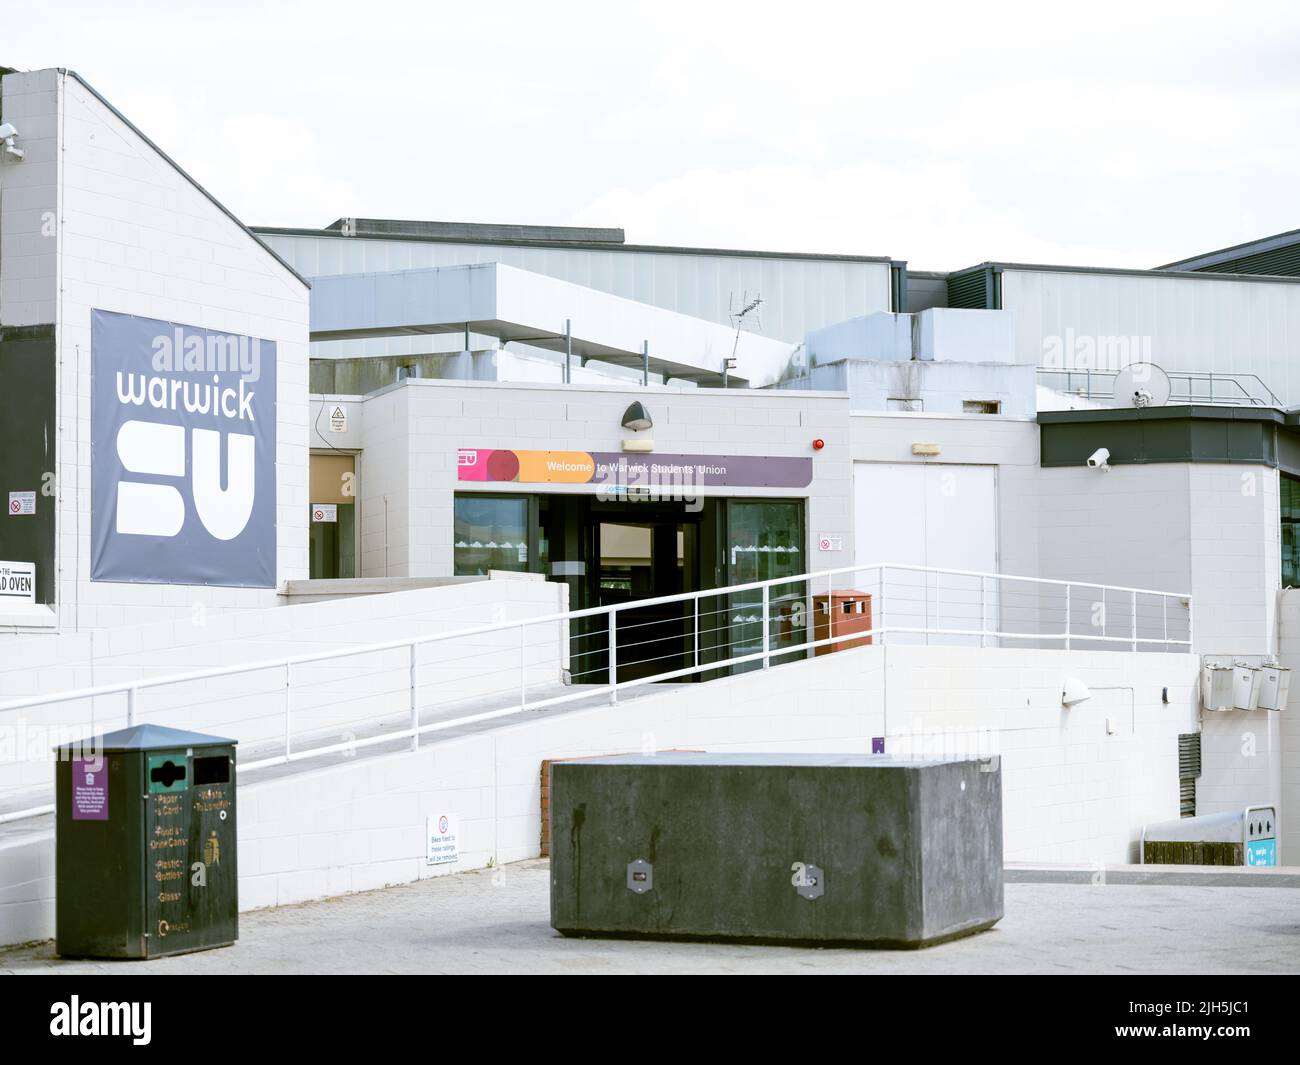 University of Warwick, Coventry, UK. The Student Union building, called the Warwick SU. Stock Photo